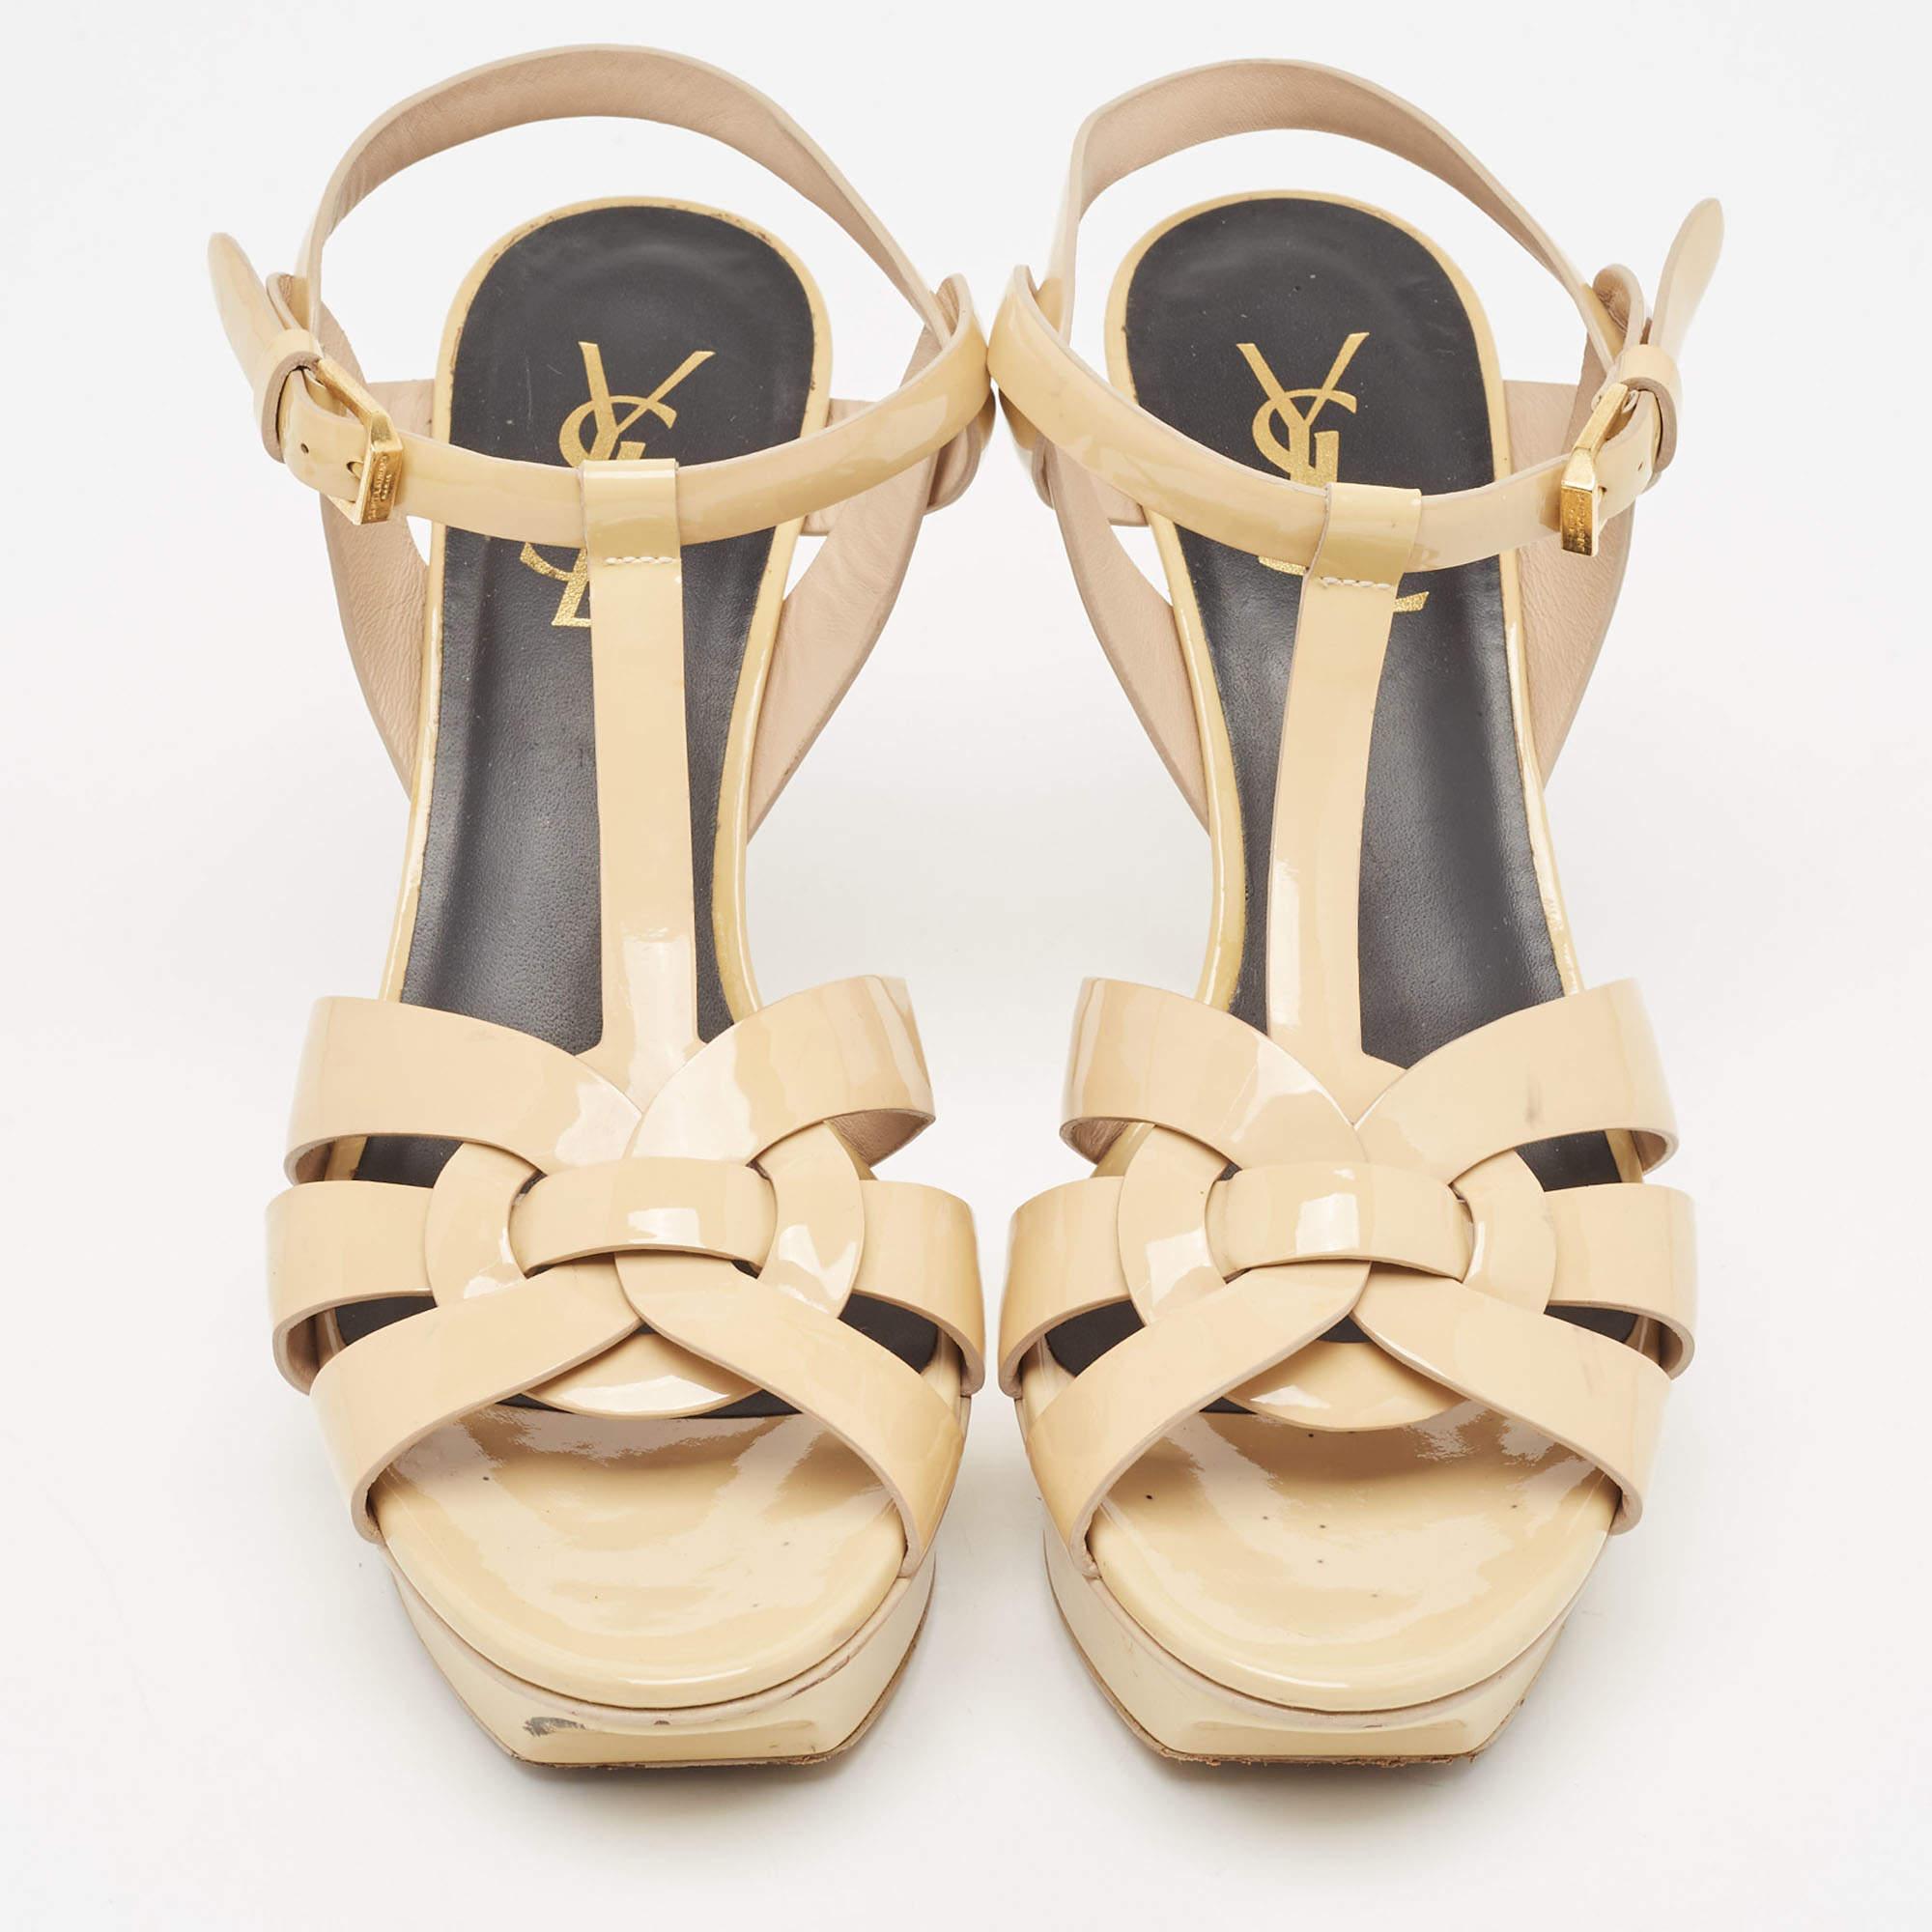 Wear these designer sandals to spruce up any outfit. They are versatile, chic, and can be easily styled. Made using quality materials, these sandals are well-built and long-lasting.

